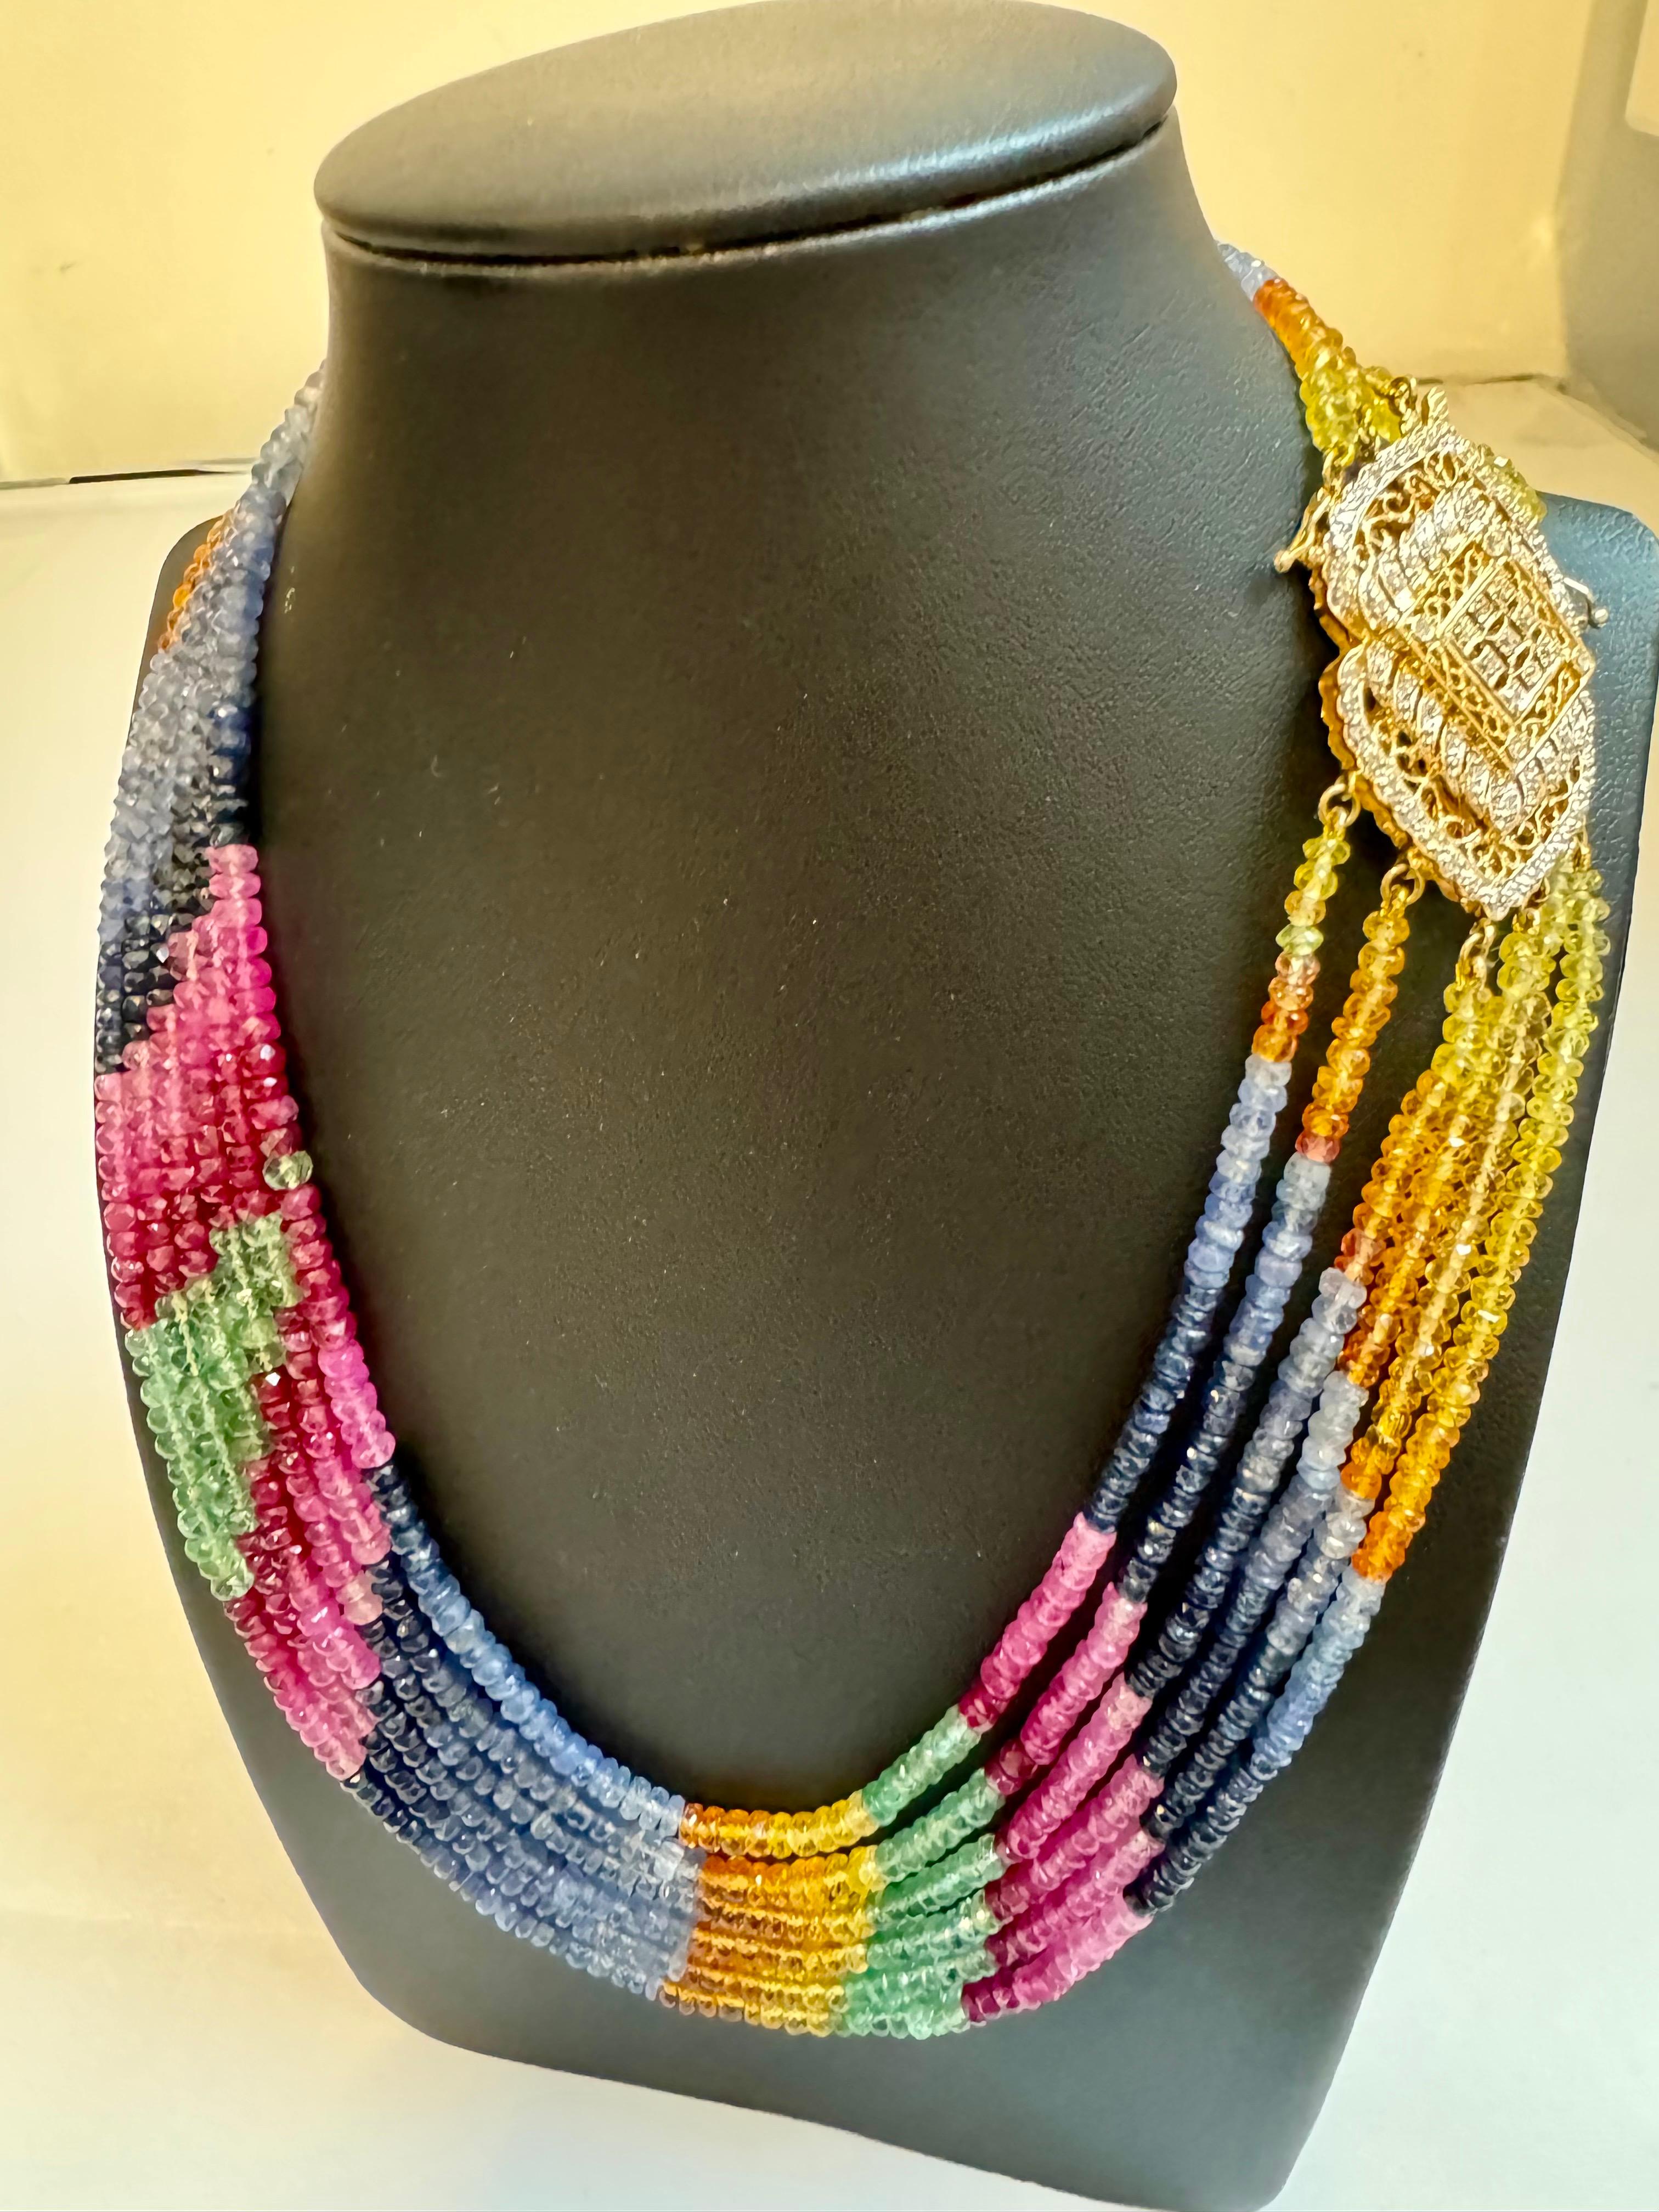 400 Ct , 6 Layer Natural Emerald Ruby & Sapphire Bead Necklace 18K Diamond Clasp In Excellent Condition For Sale In New York, NY